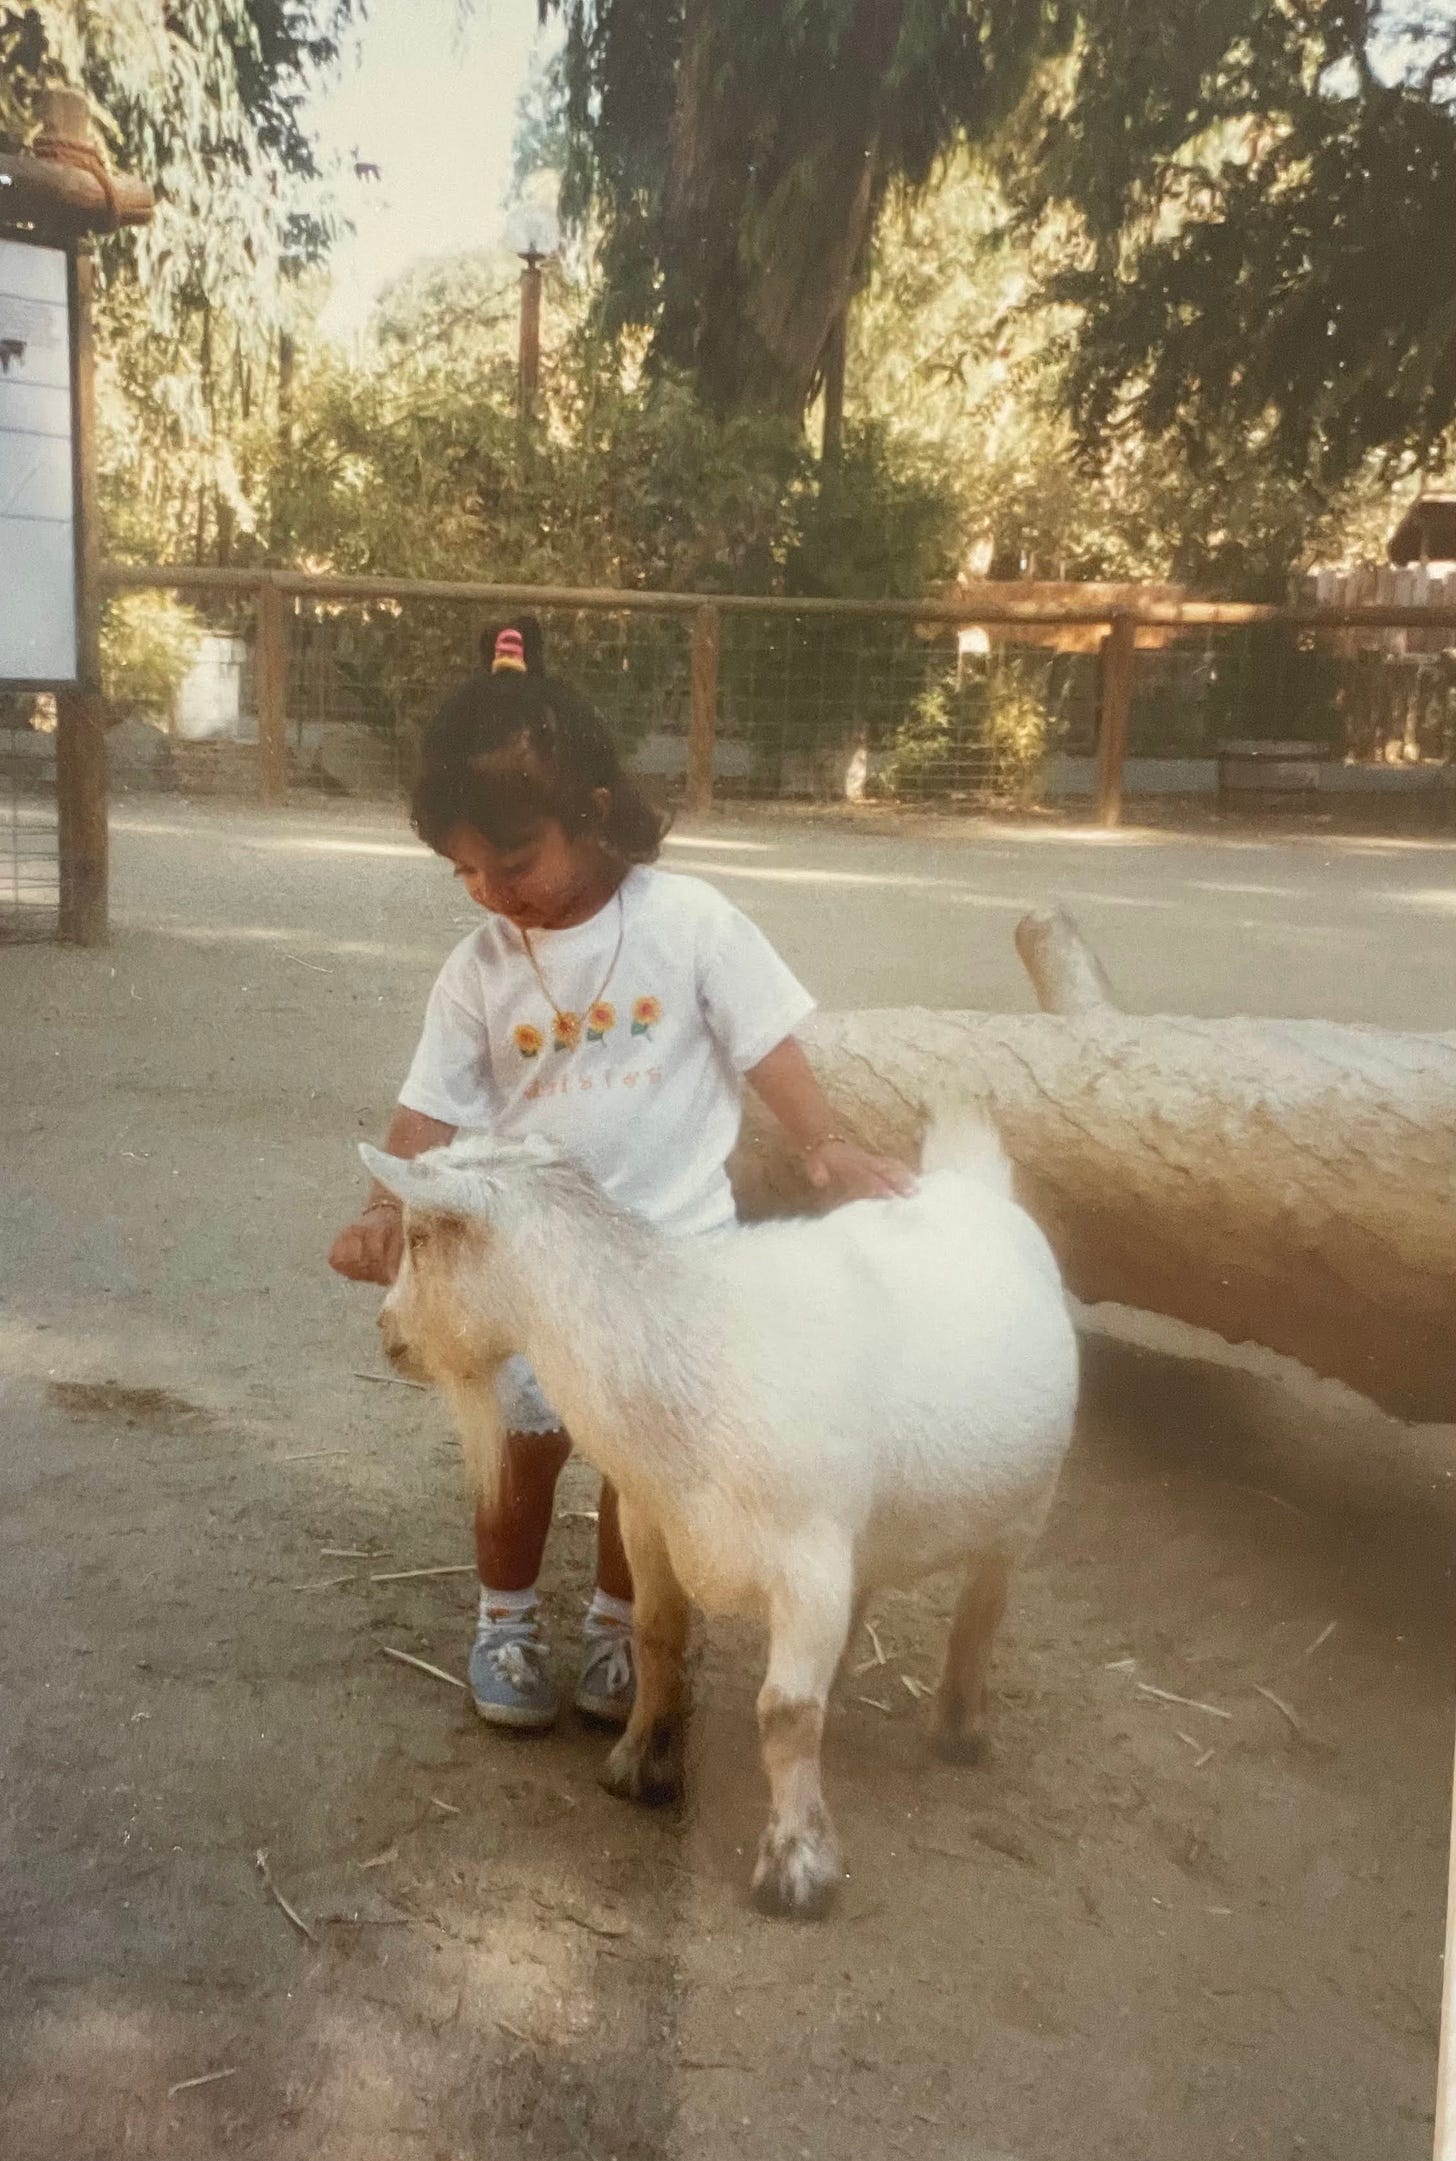 A brown-skinned toddler pets a white goat. She has a ponytail and wears a white top with flowers on it. The enclosure in which she and the goat stand is closed off by a wooden fence and contains a tree trunk.